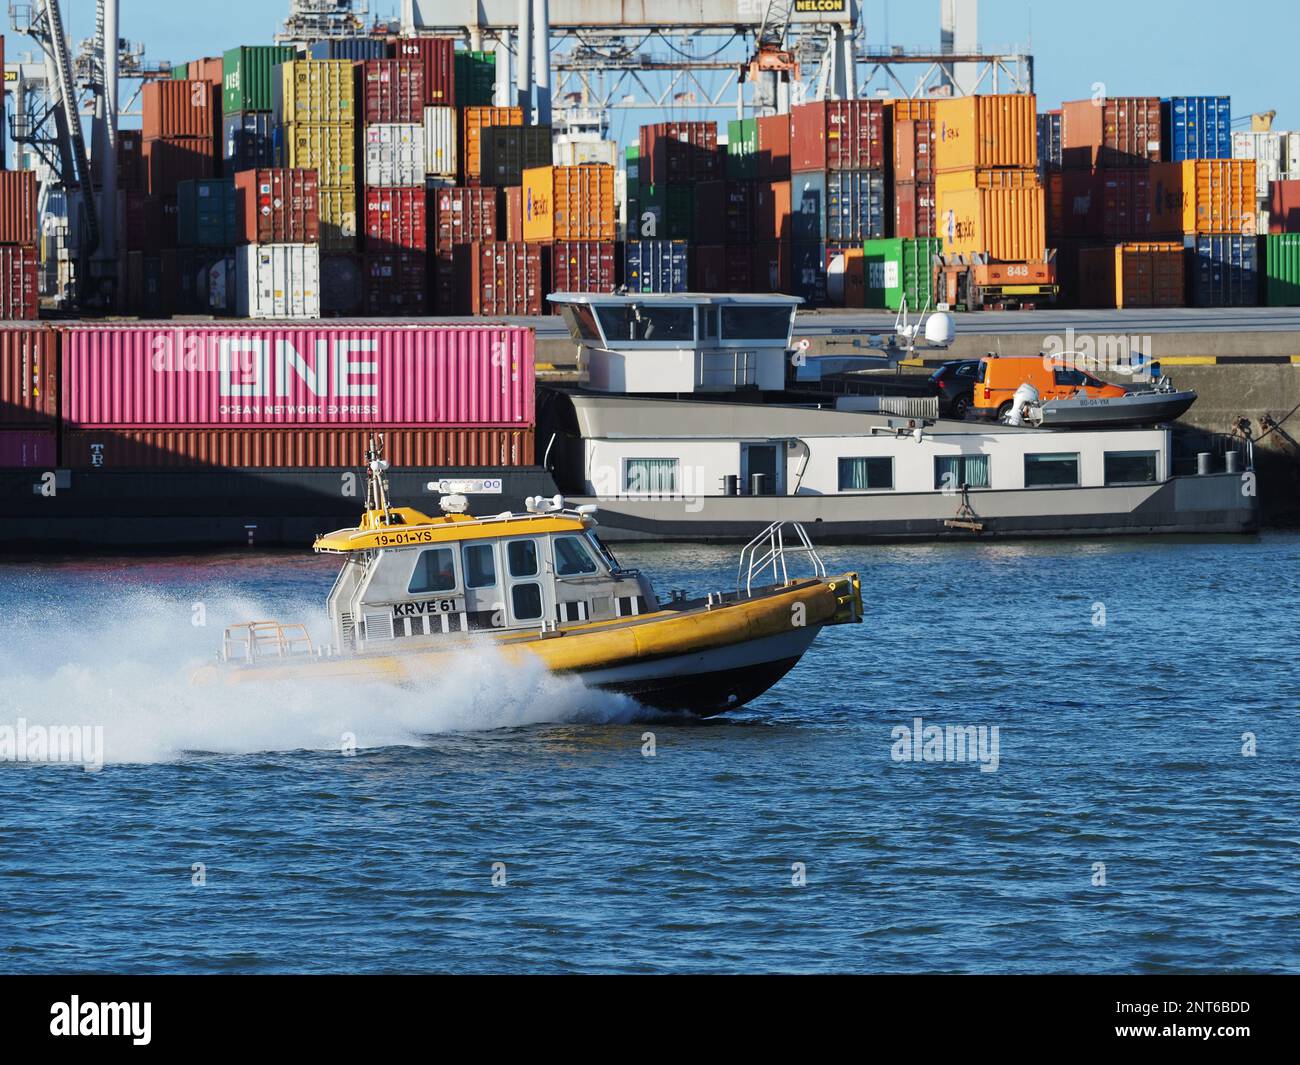 KRVE61 is a high-speed pilot tender vessel, seen here in the Port of Rotterdam, the Netherlands. Stock Photo